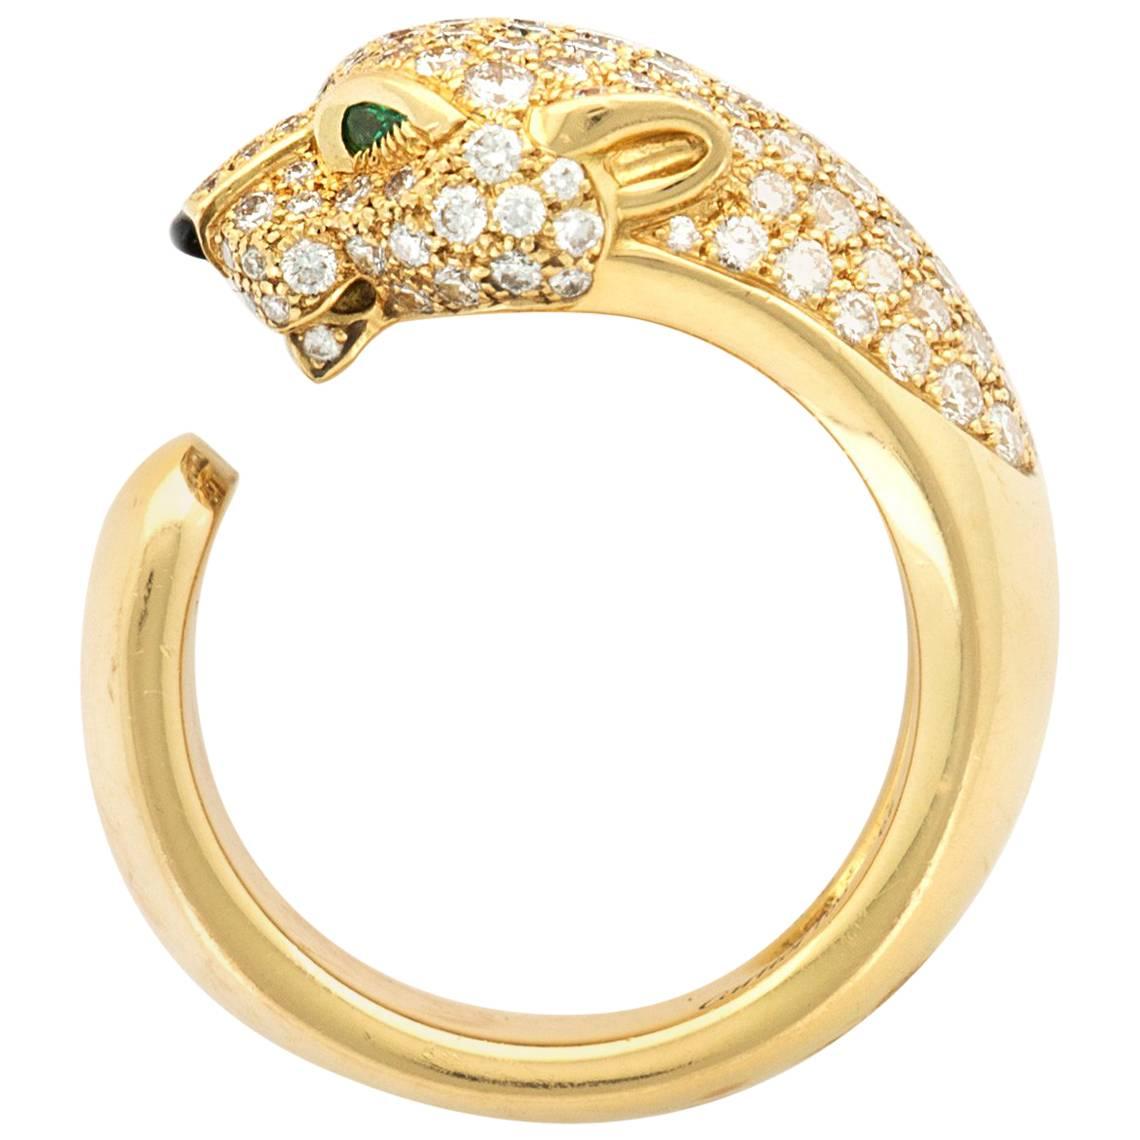 Cartier Yellow Gold "Panthere de Cartier" Diamond Ring For Sale